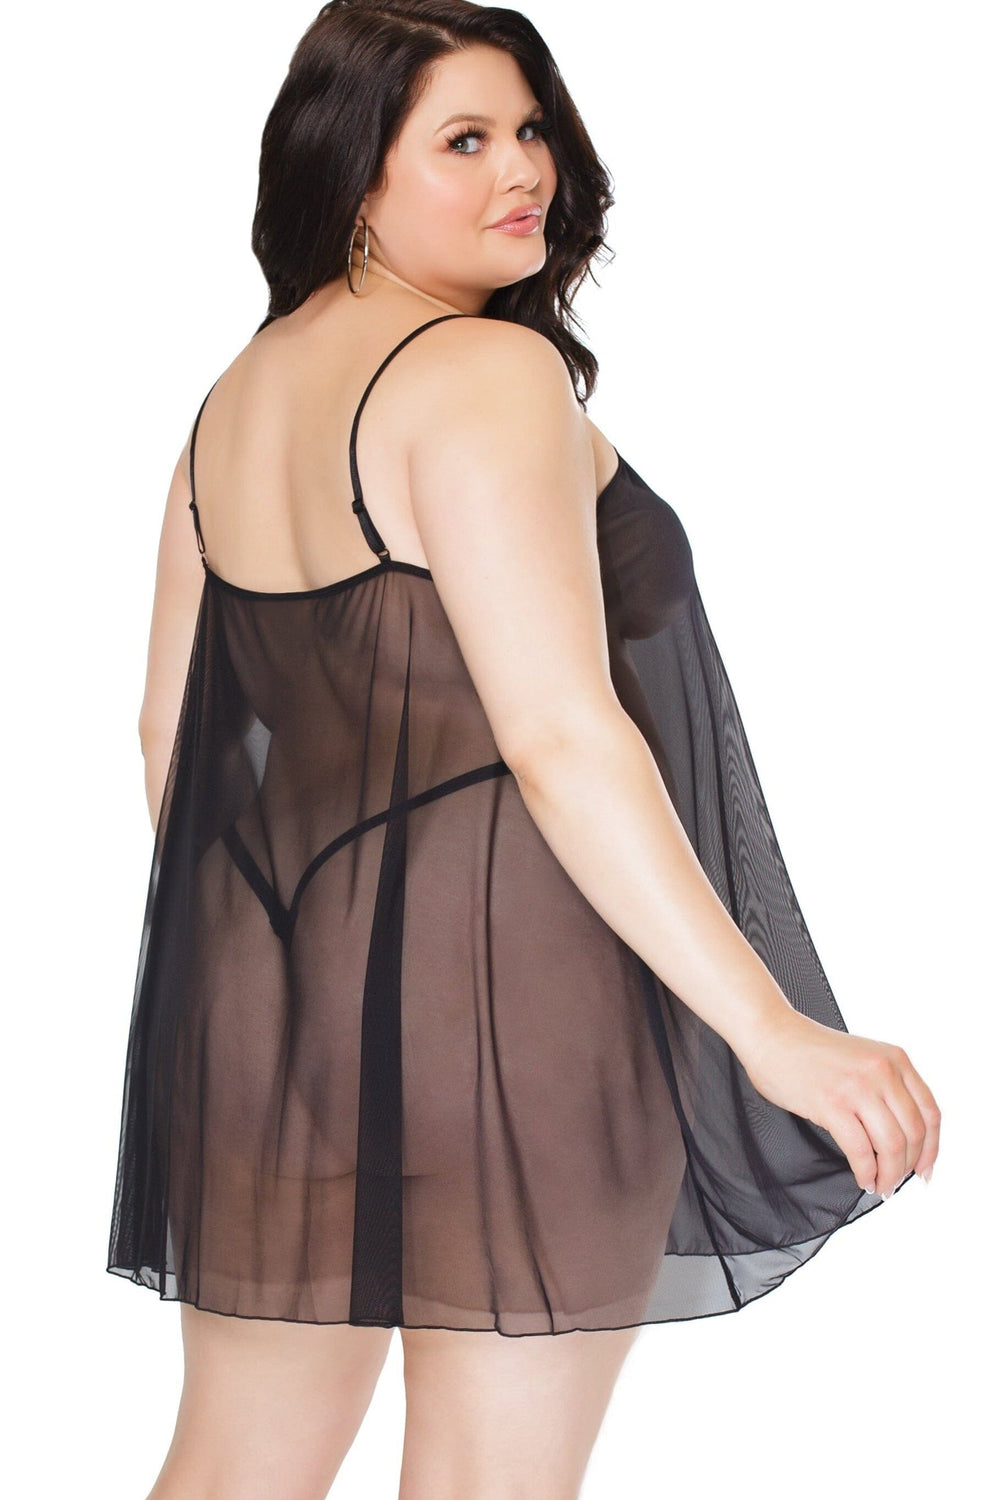 Baby Girl Sheer Chemise | Plus Size-Chemises-Coquette-Black-Q-SEXYSHOES.COM